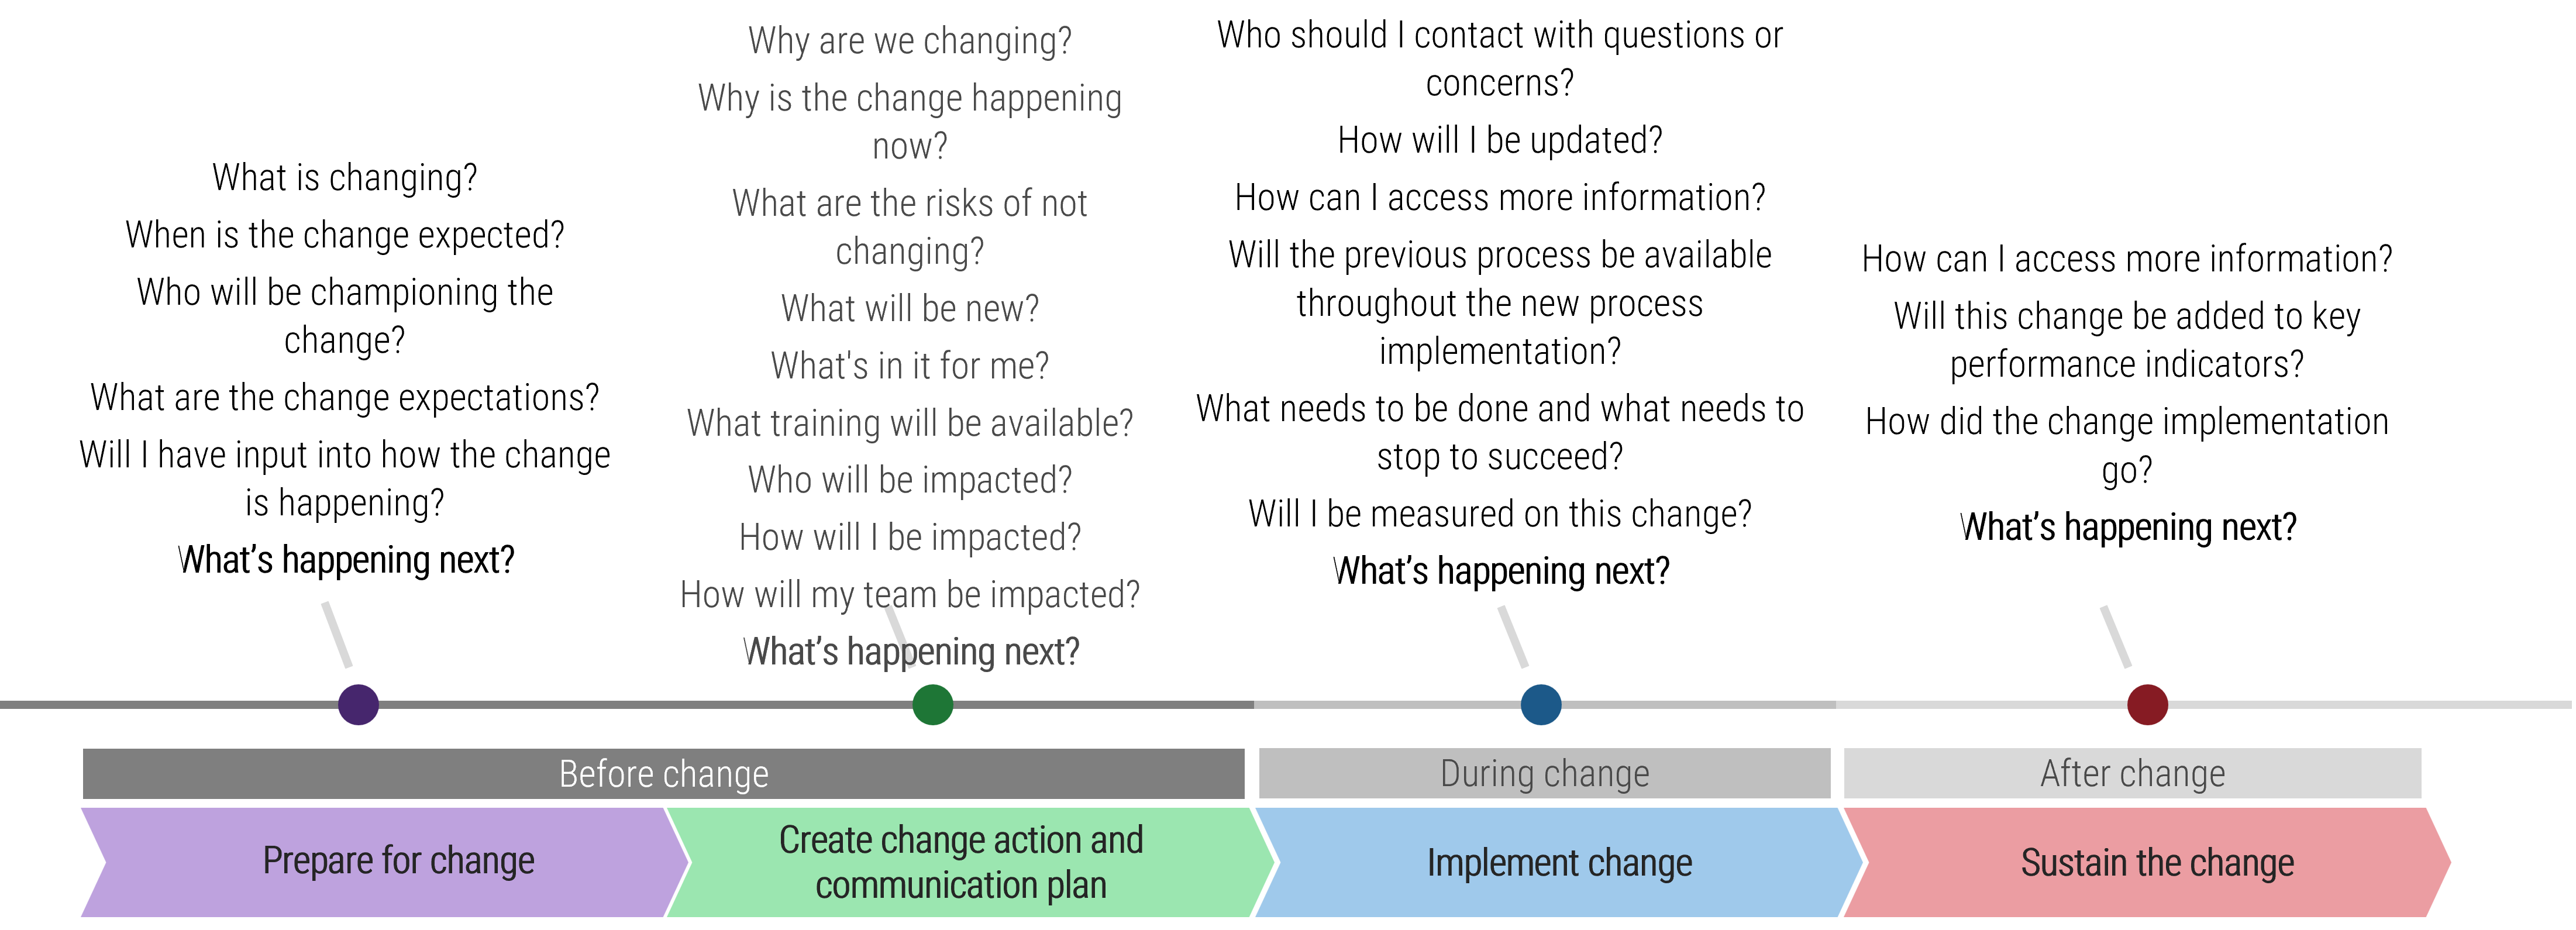 The outline for each stage of the change process, showing what happens next.